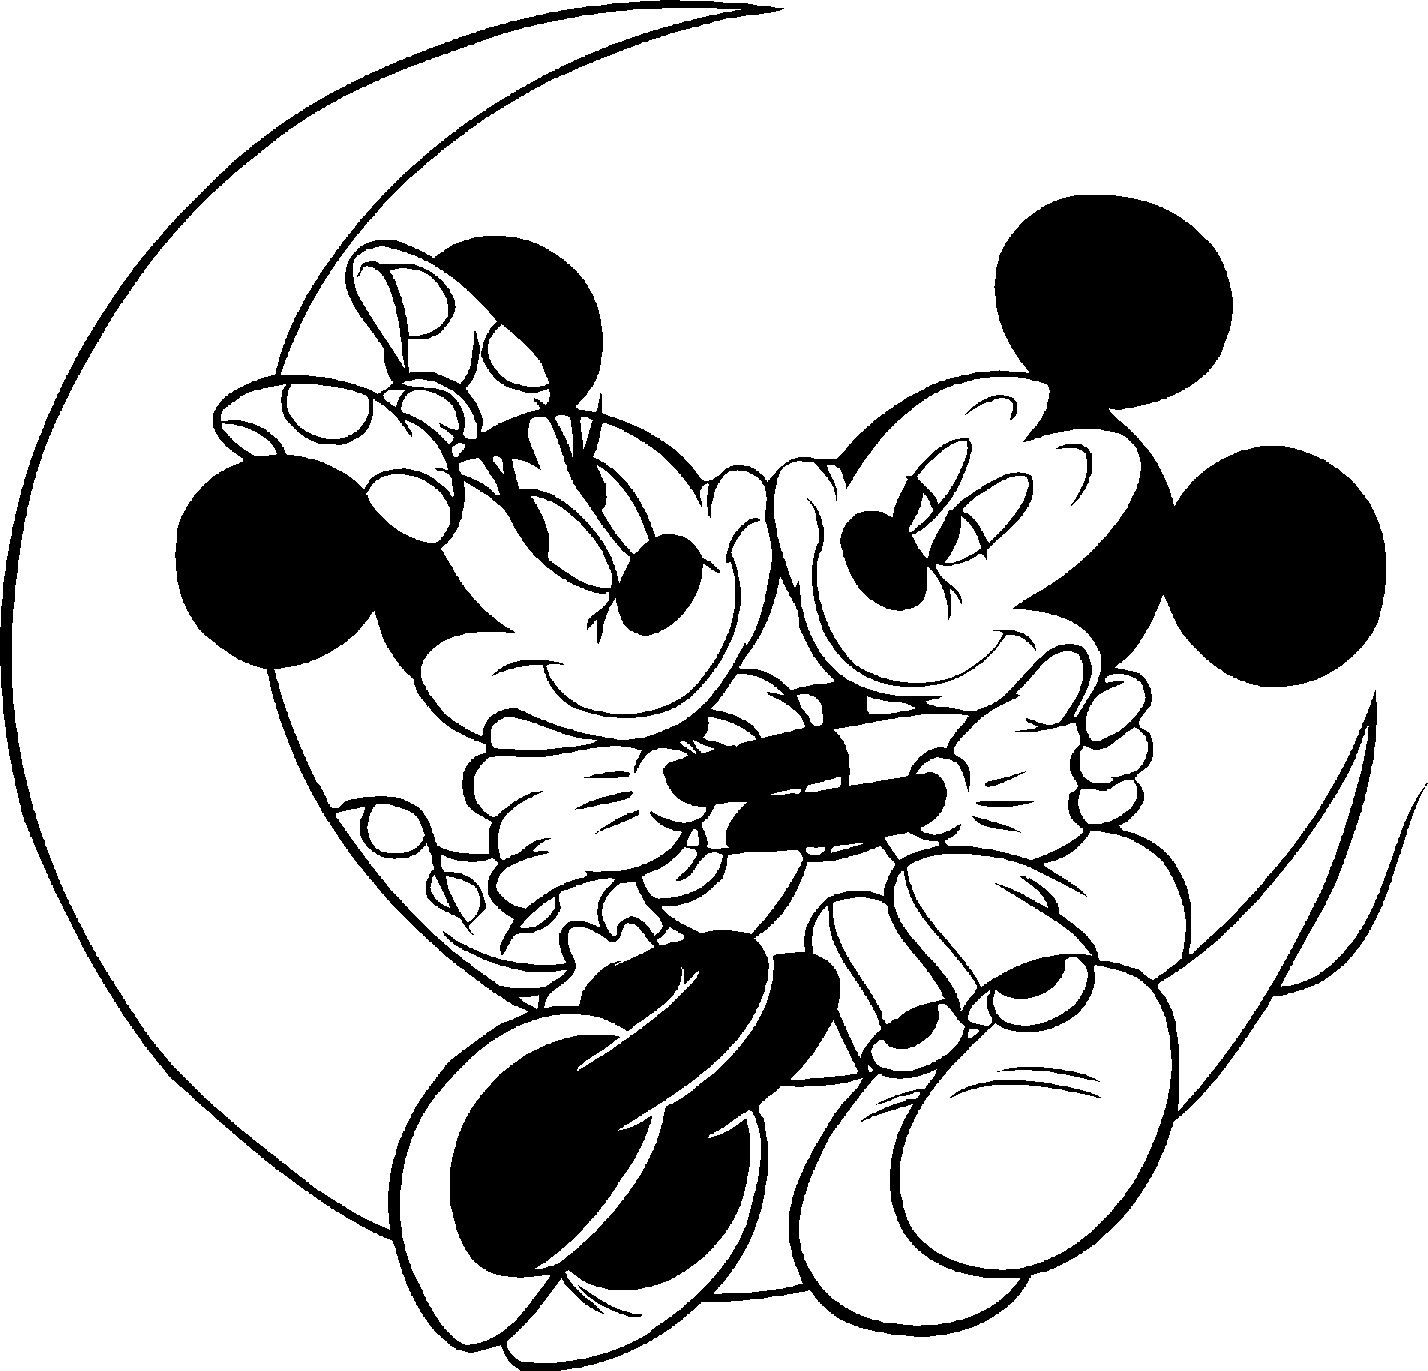 Free Printable Mickey Mouse Coloring Pages For Kids | Healthy Living - Free Printable Minnie Mouse Coloring Pages